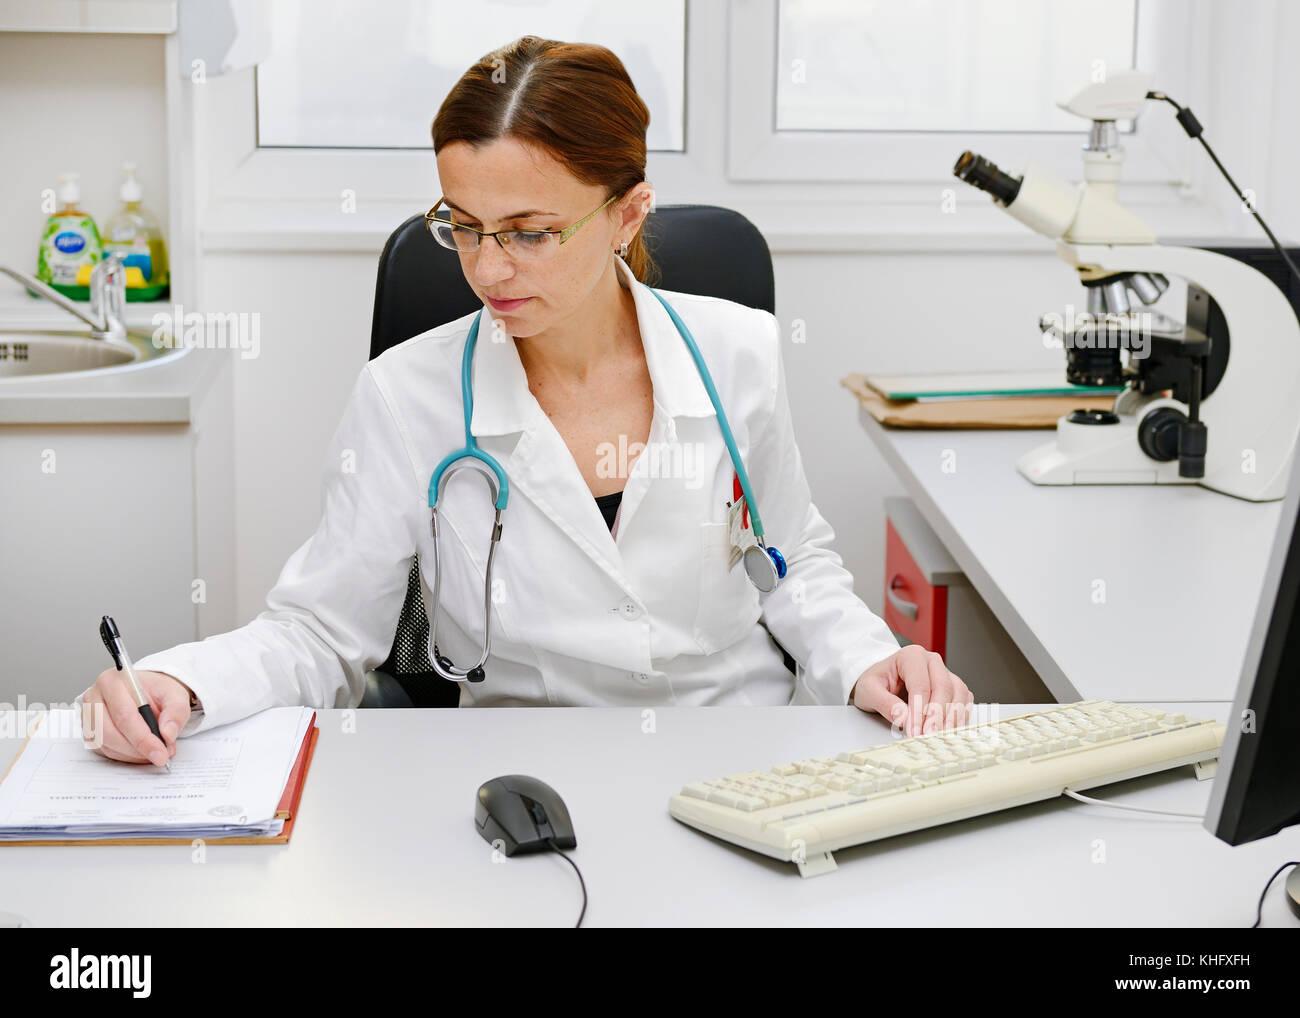 Doctor Working at Her Desk Stock Photo